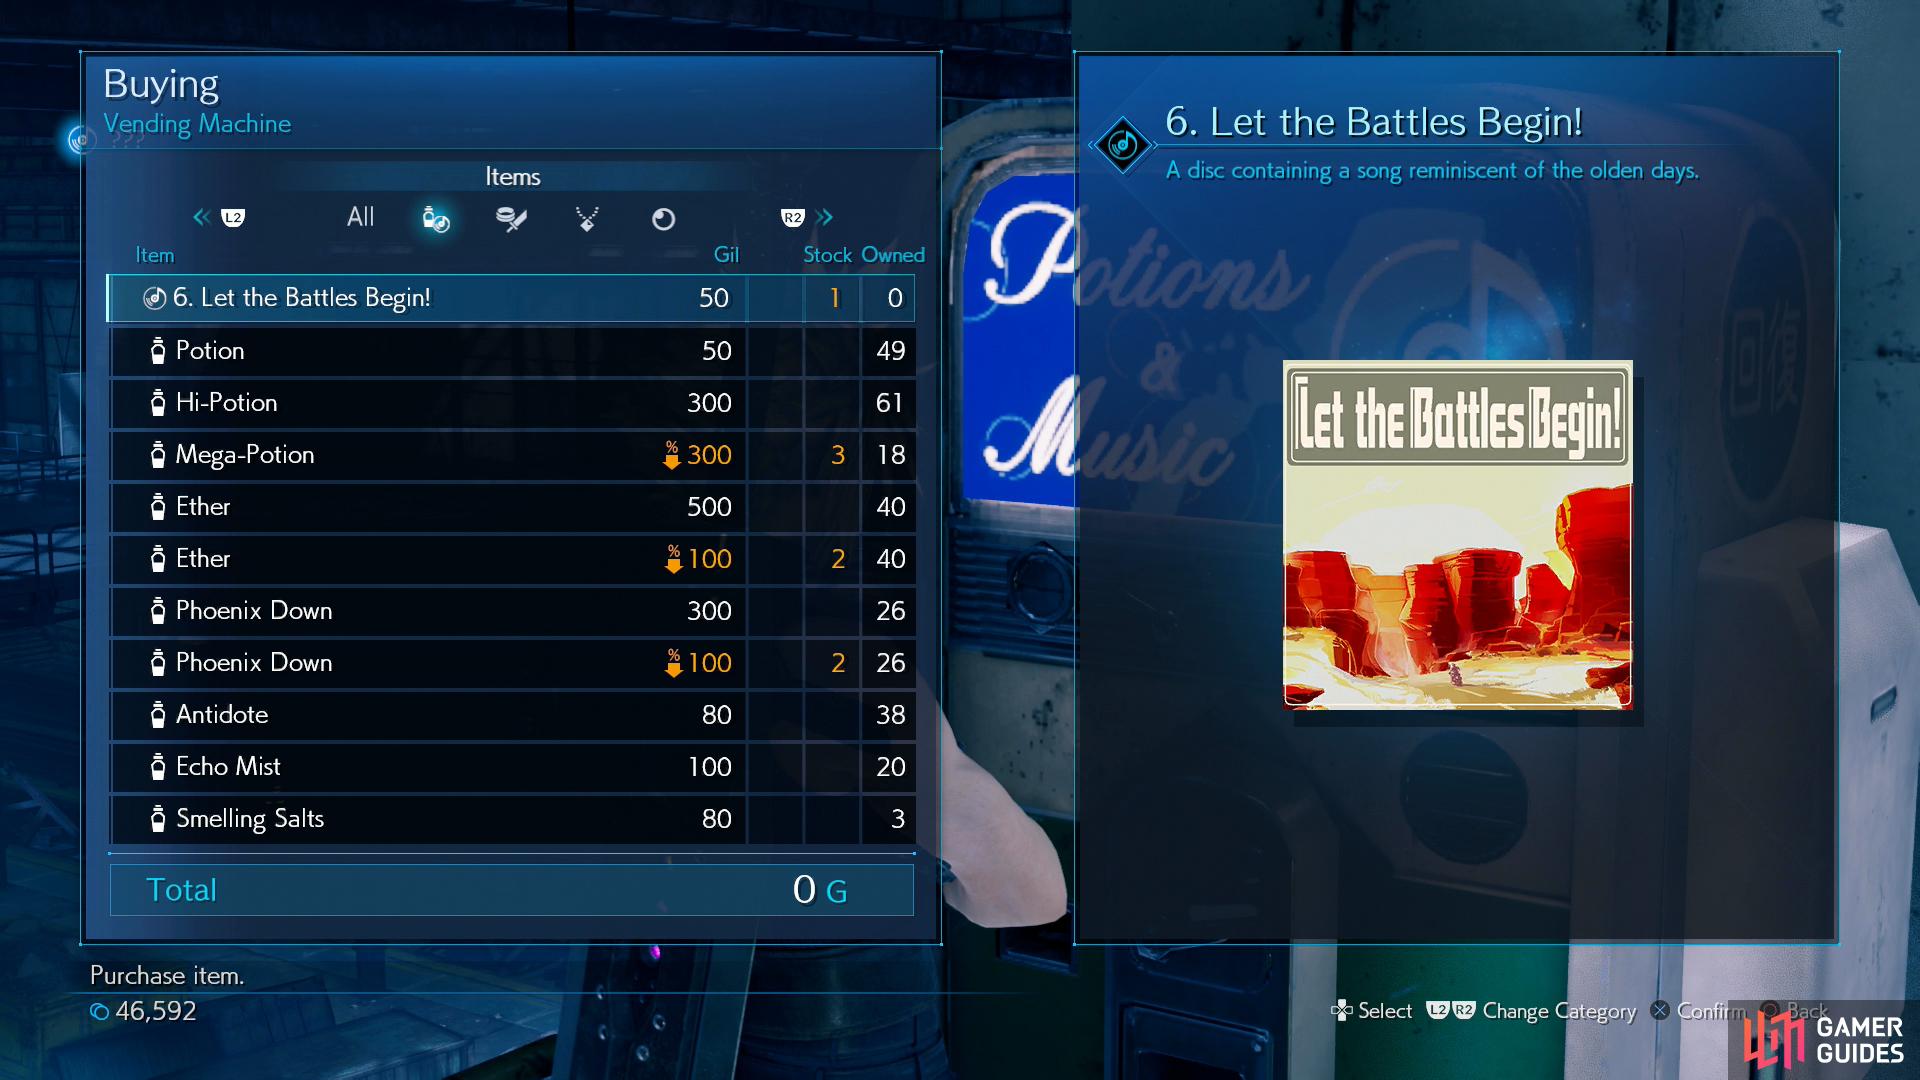 You can buy the "Let the Battles Begin!" Music Disc from a vending machine.